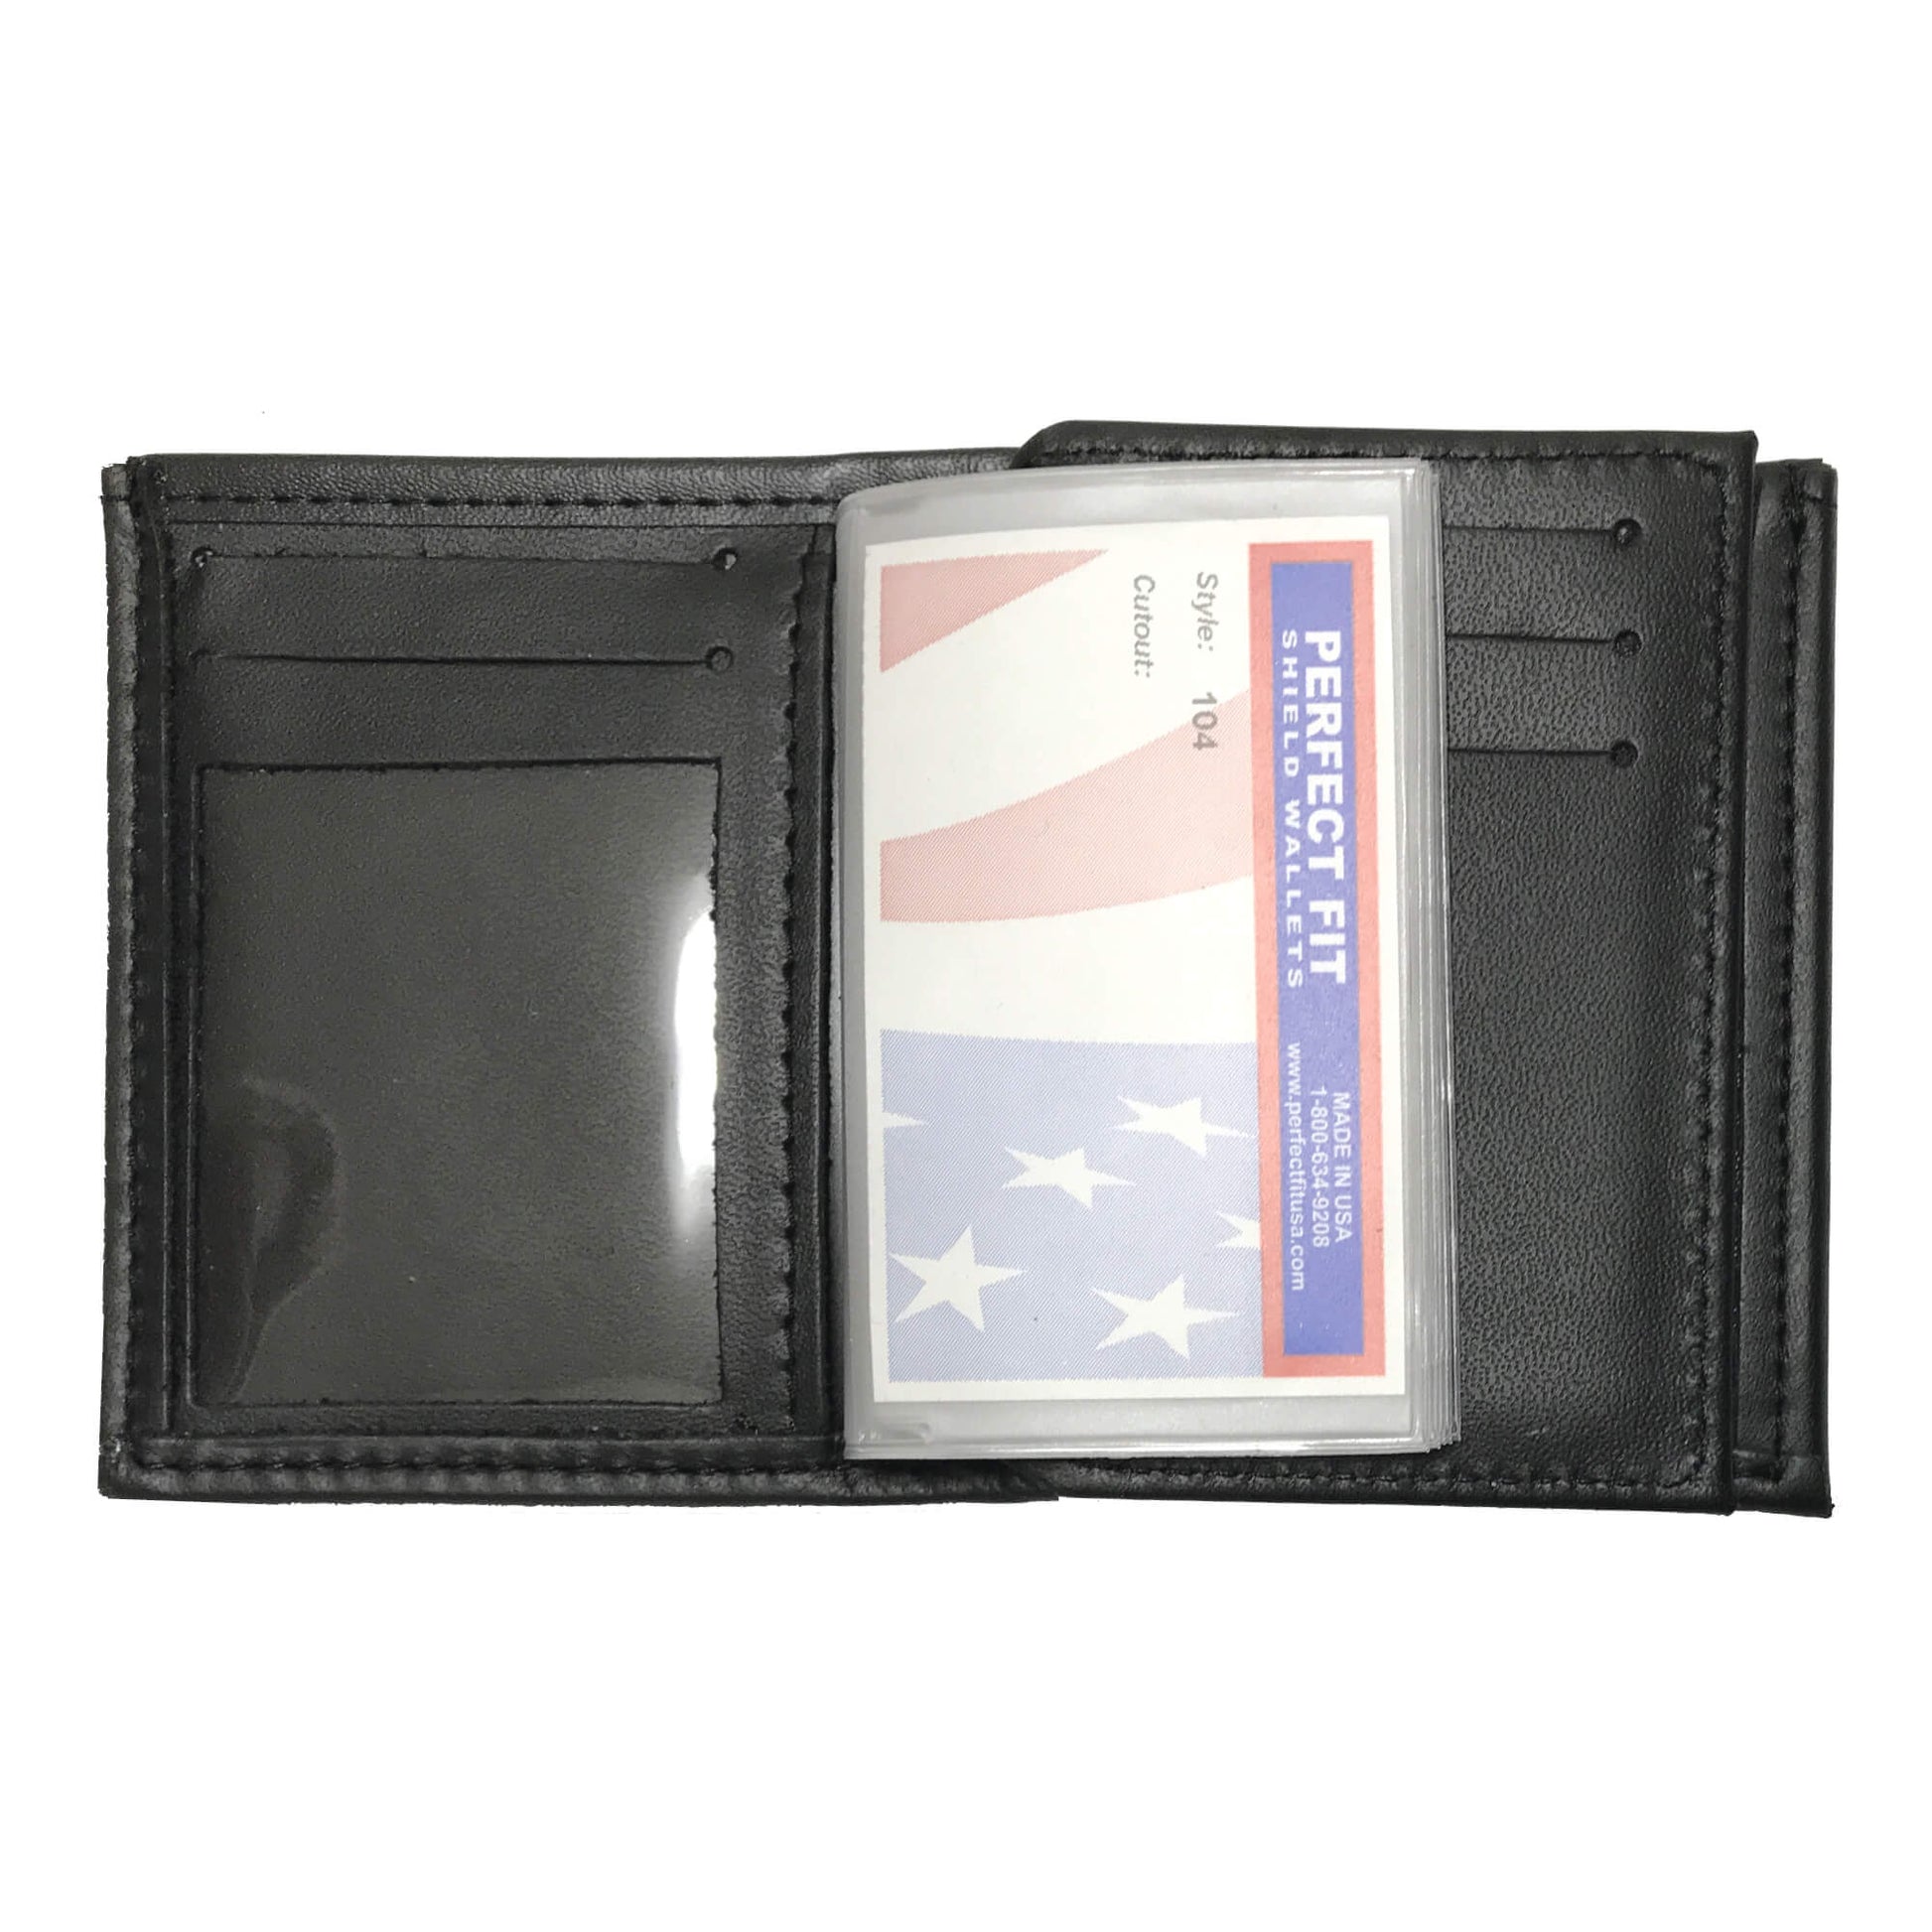 U.S. Customs and Border Protection (CBP) Bifold Hidden Badge Wallet-Perfect Fit-911 Duty Gear USA